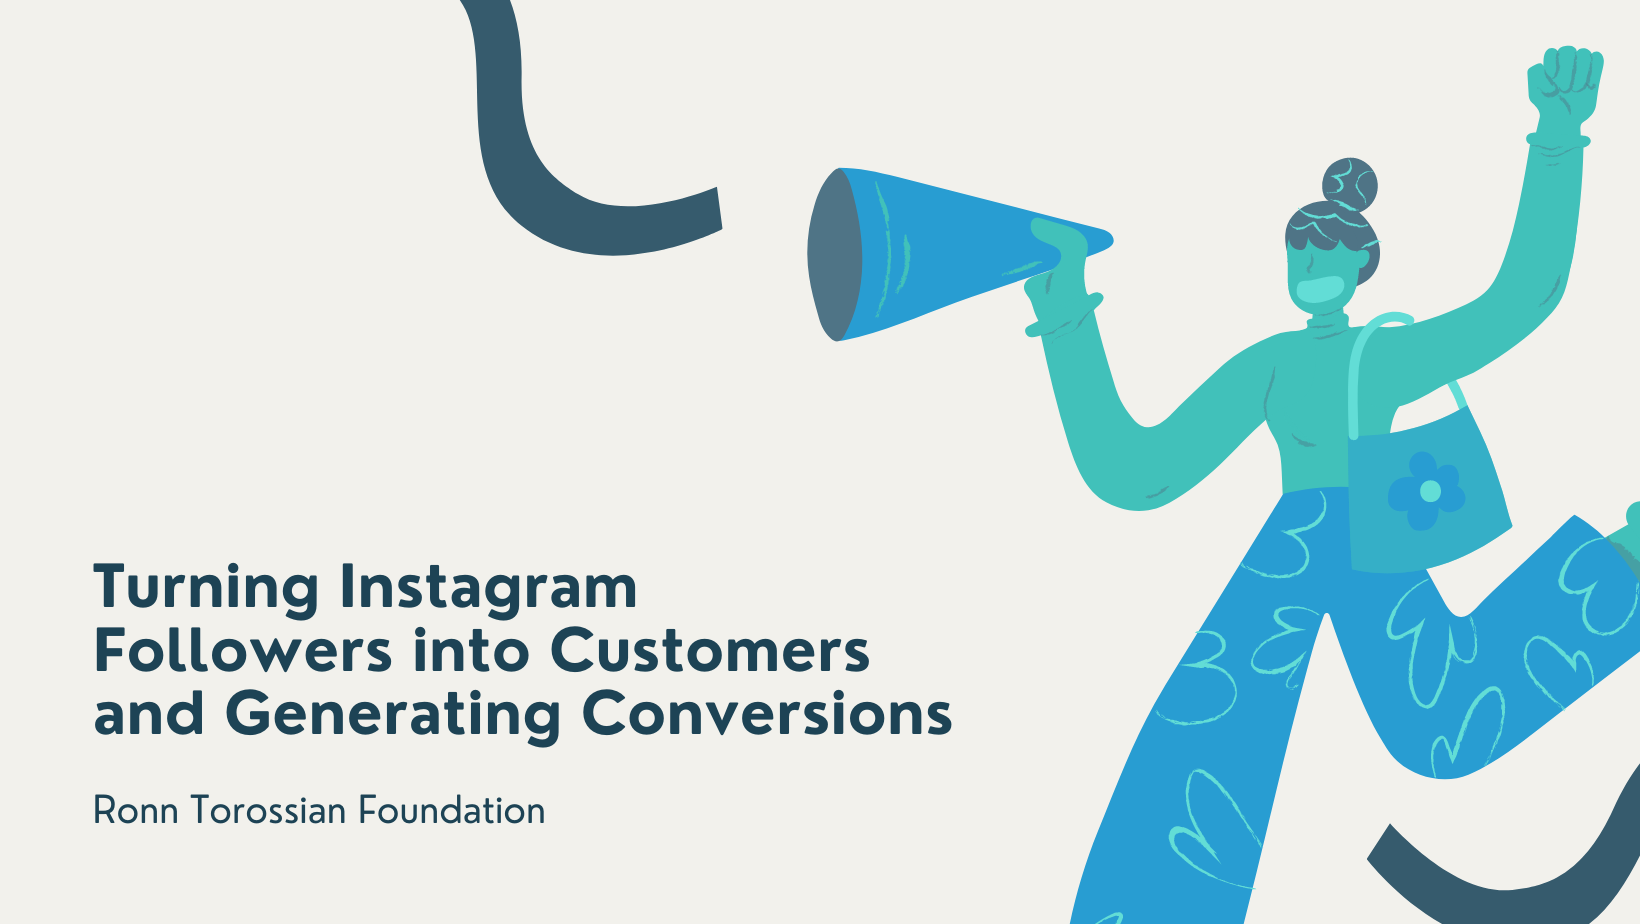 Turning Instagram Followers into Customers and Generating Conversions